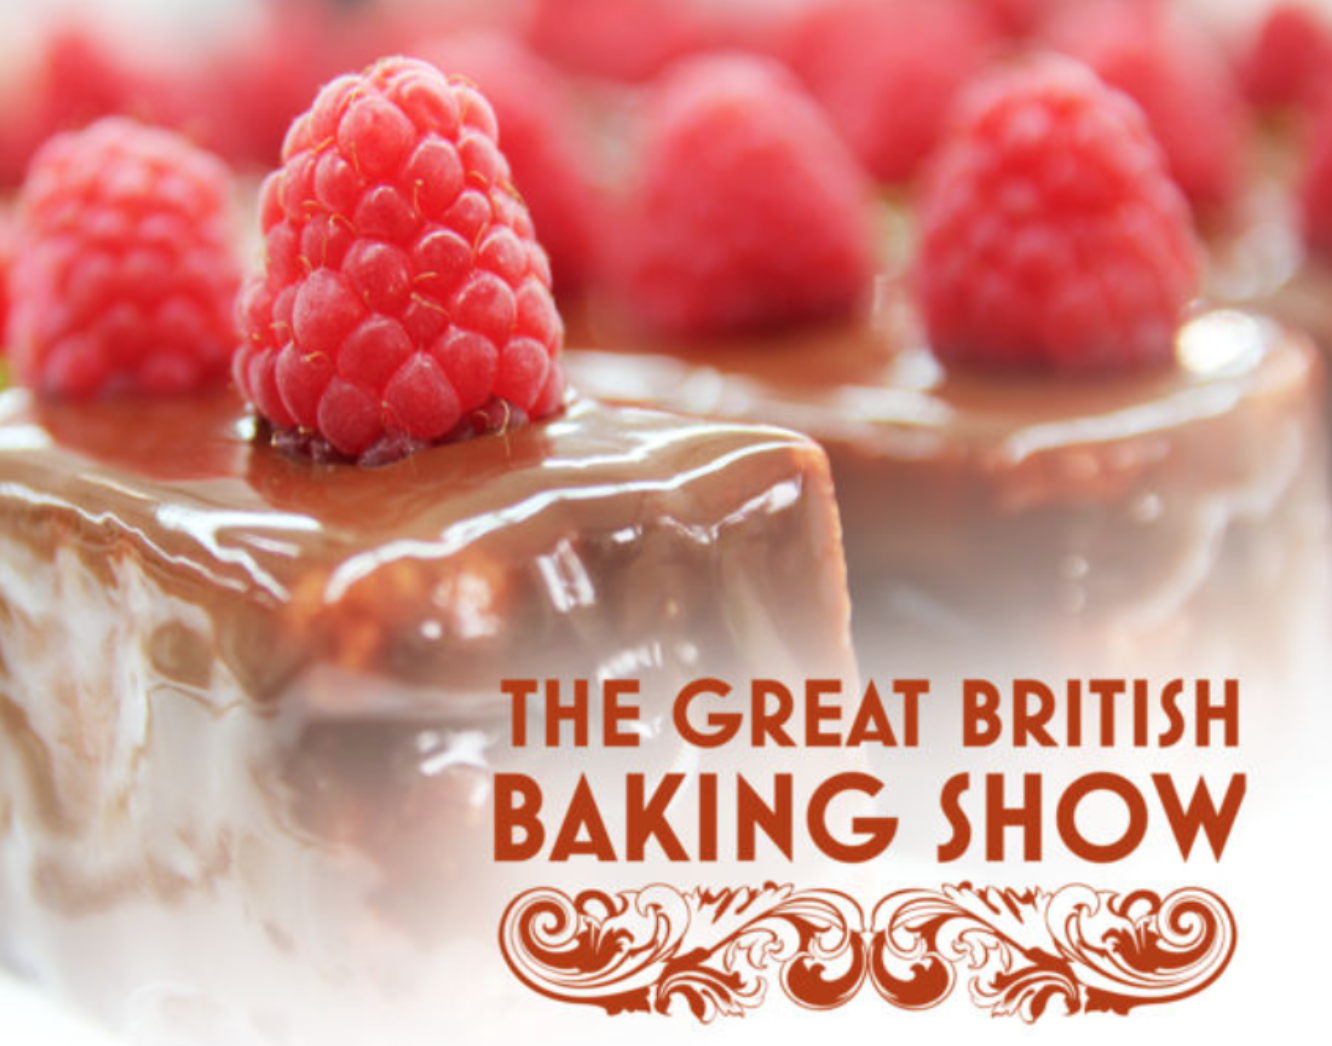 The Great British Baking Show (Review)